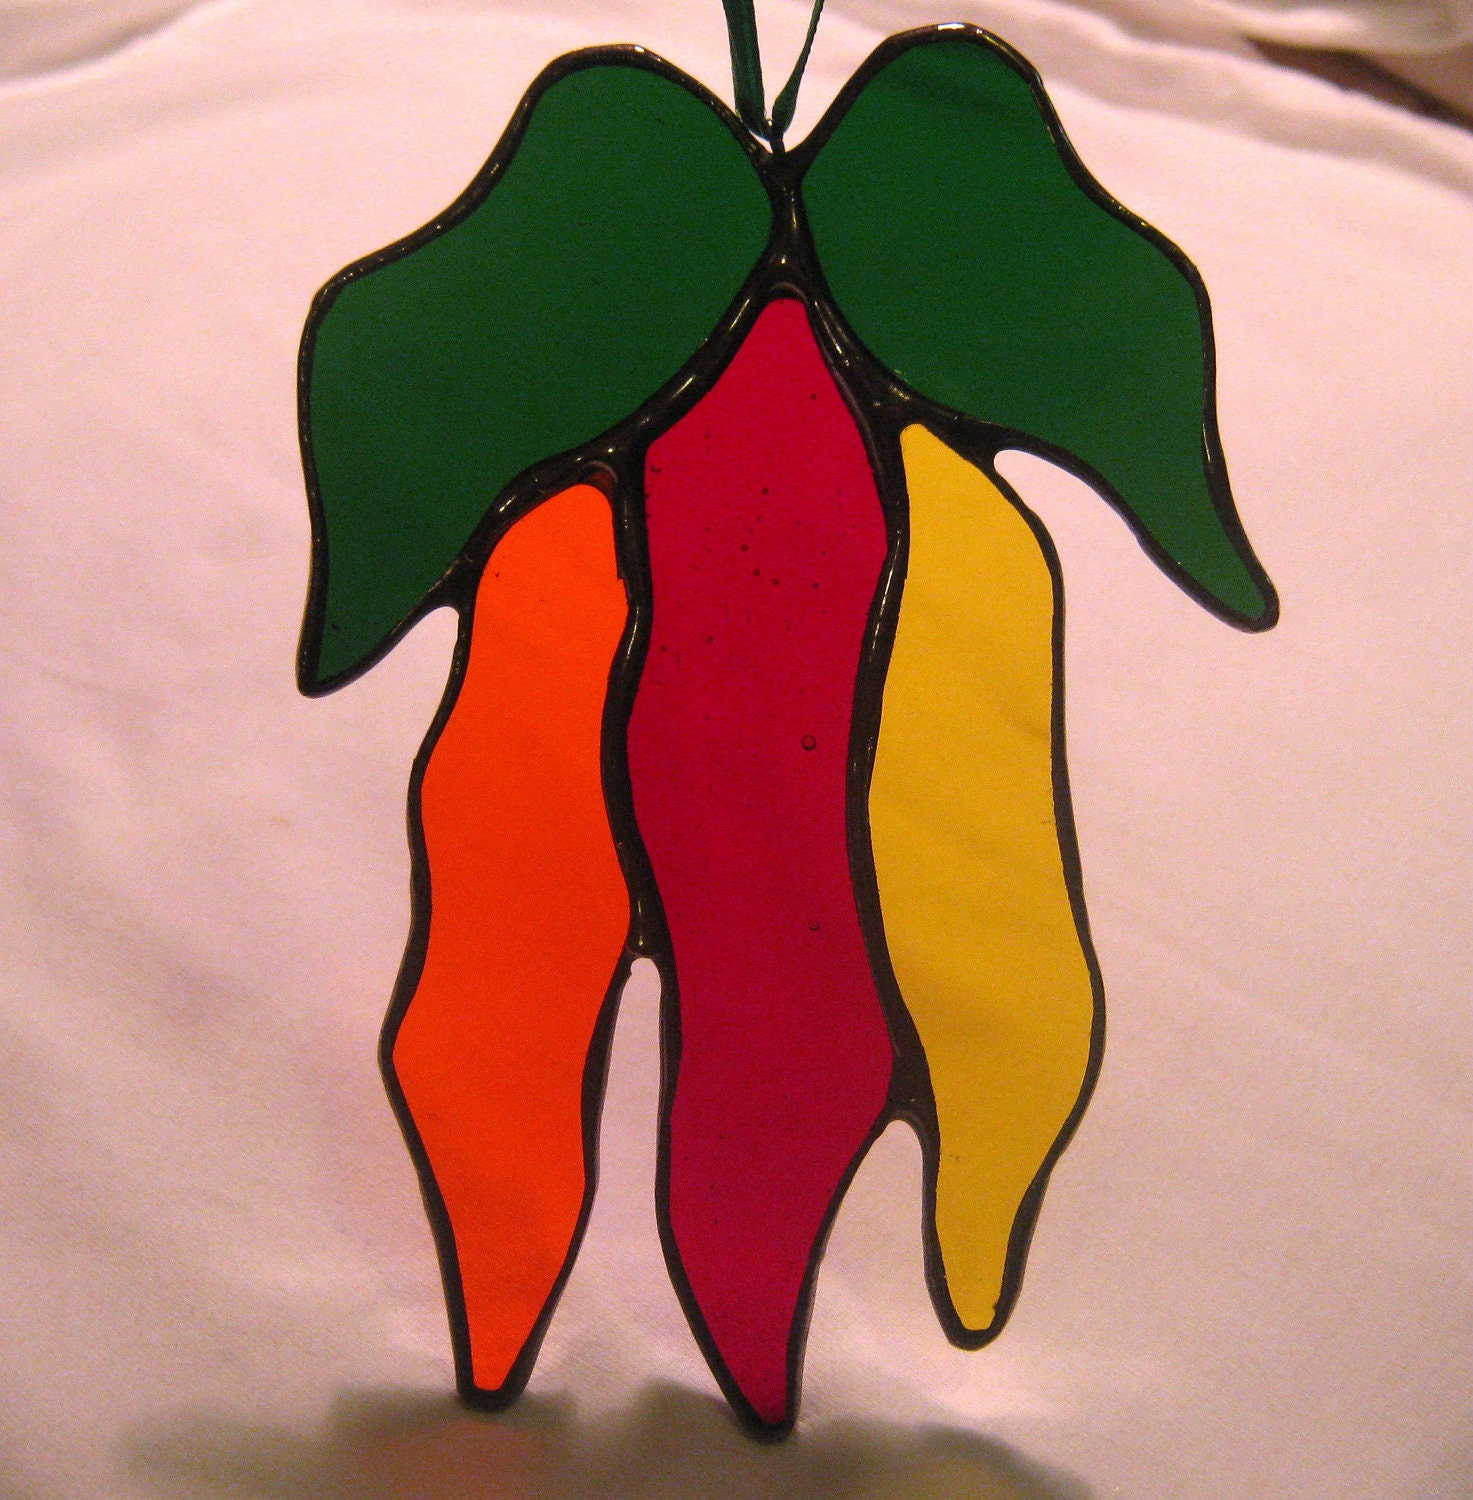 Stained Glass Chili Peppers Sun catcher